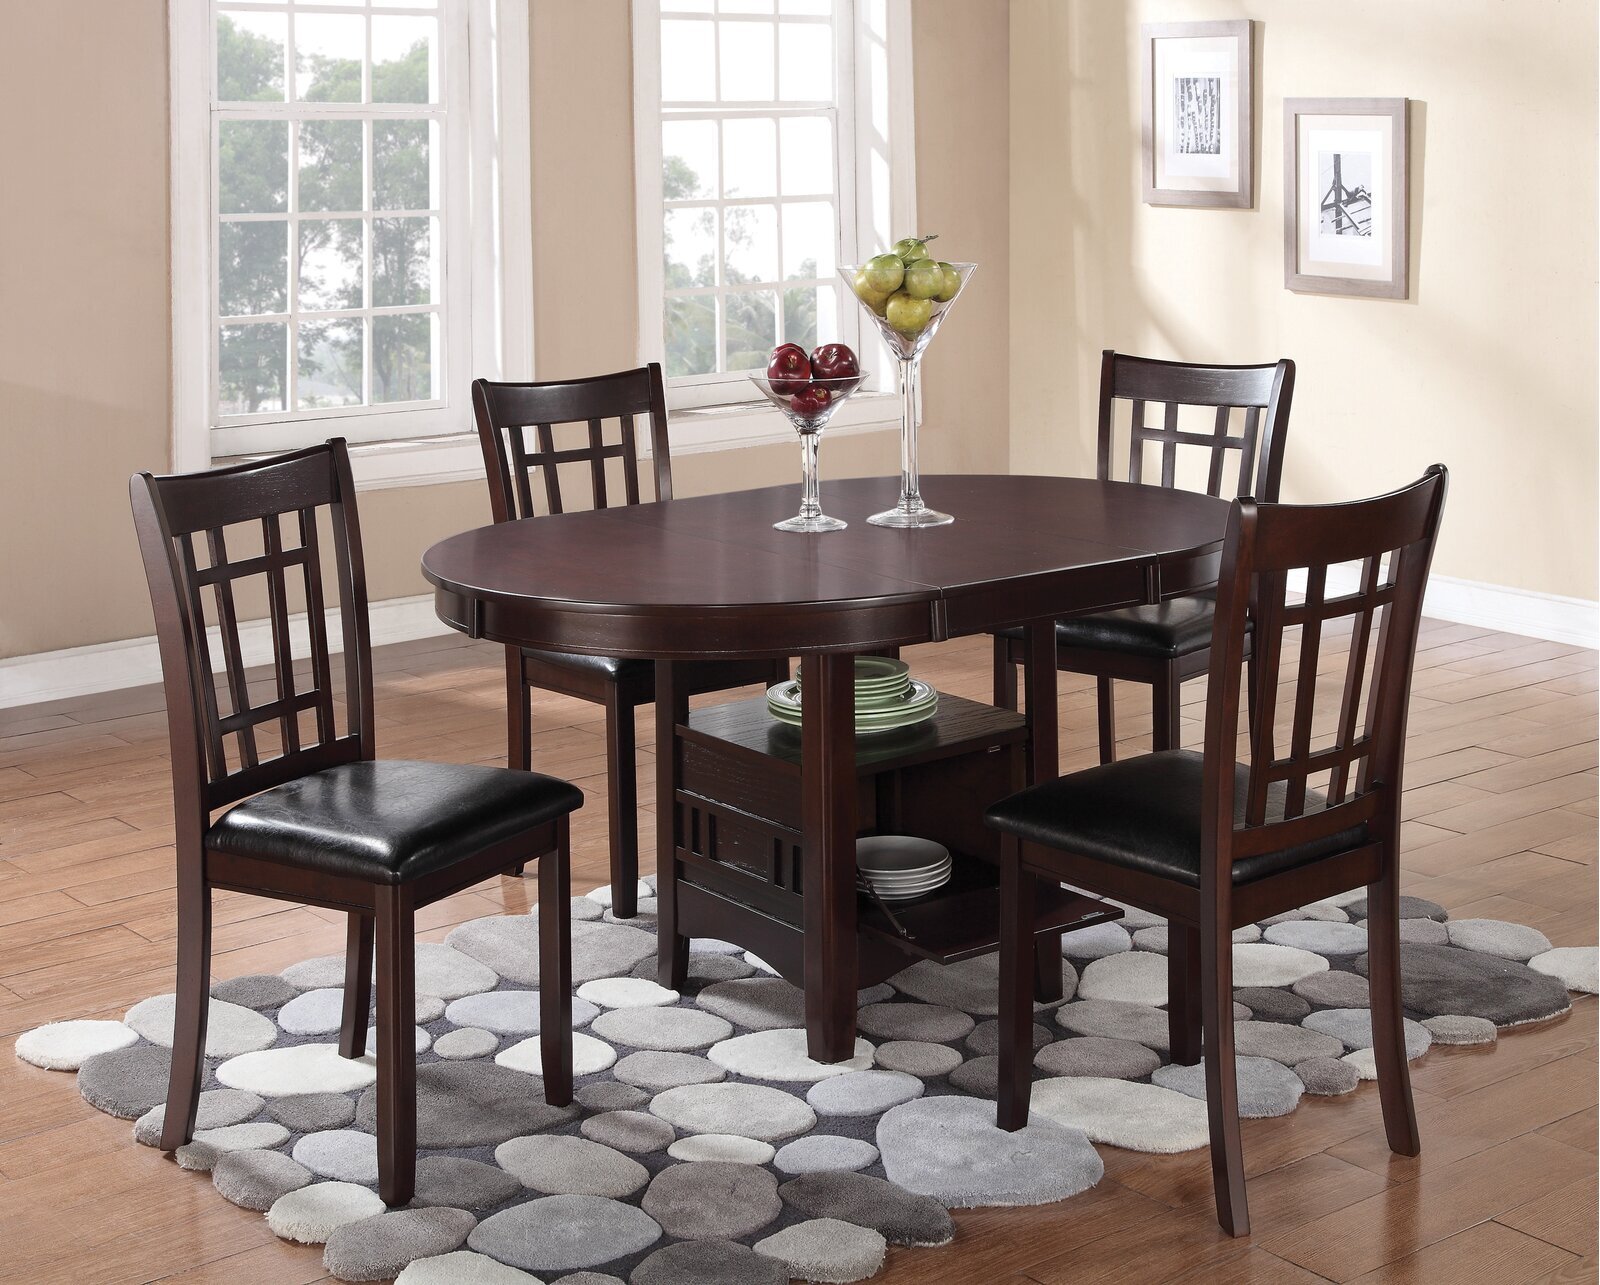 Expandable Oval Dining Tables With Storage